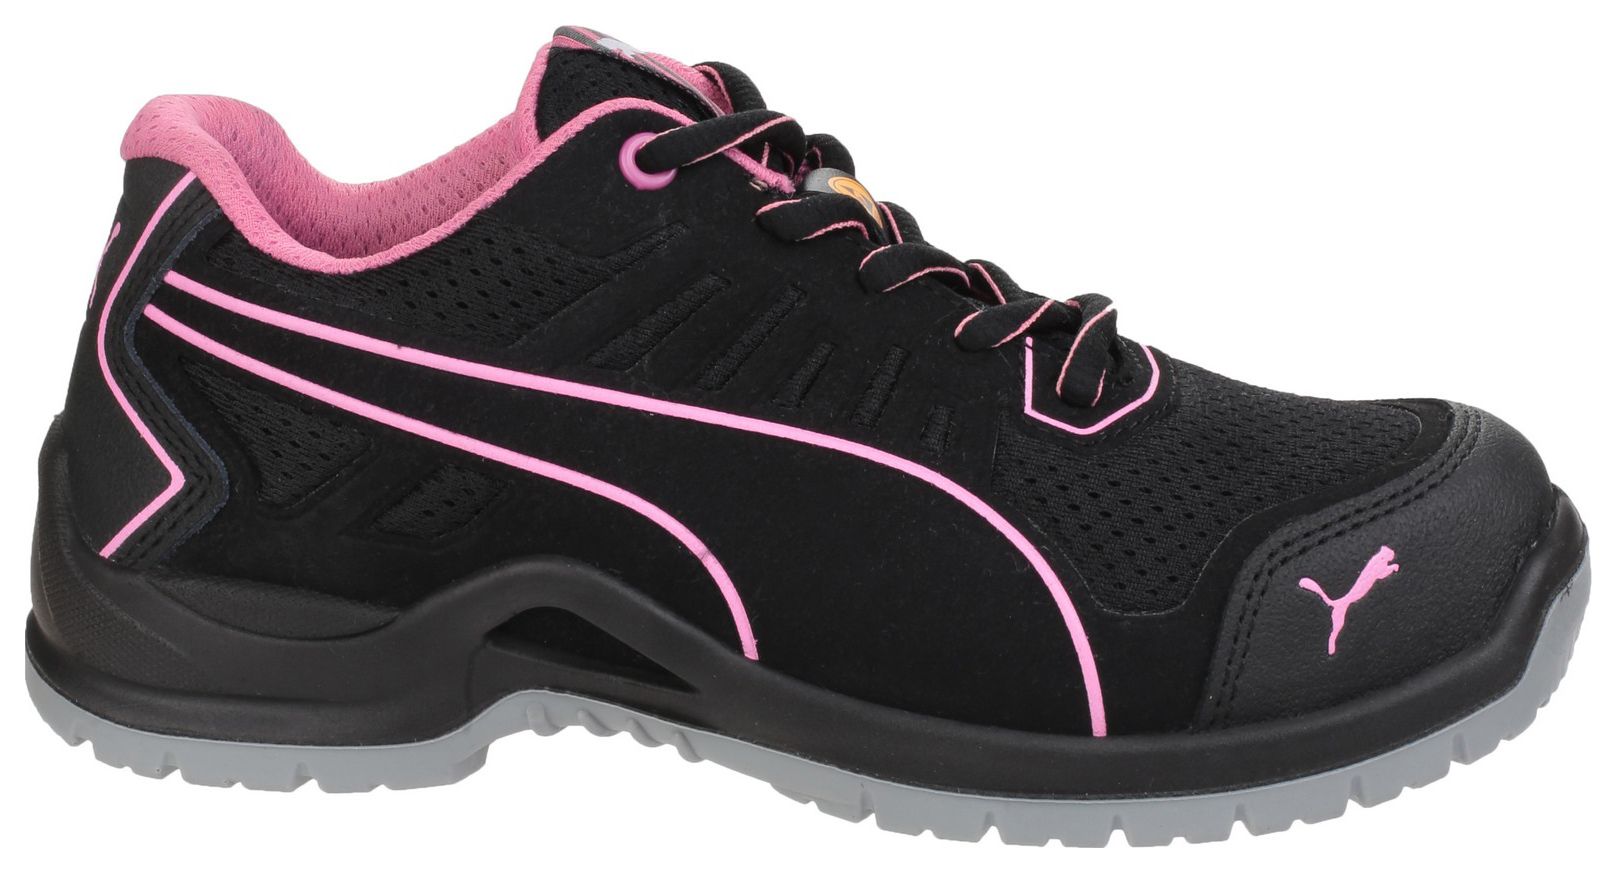 Puma Fuse Technic 644110 Womens Safety Trainers Black - Size 40